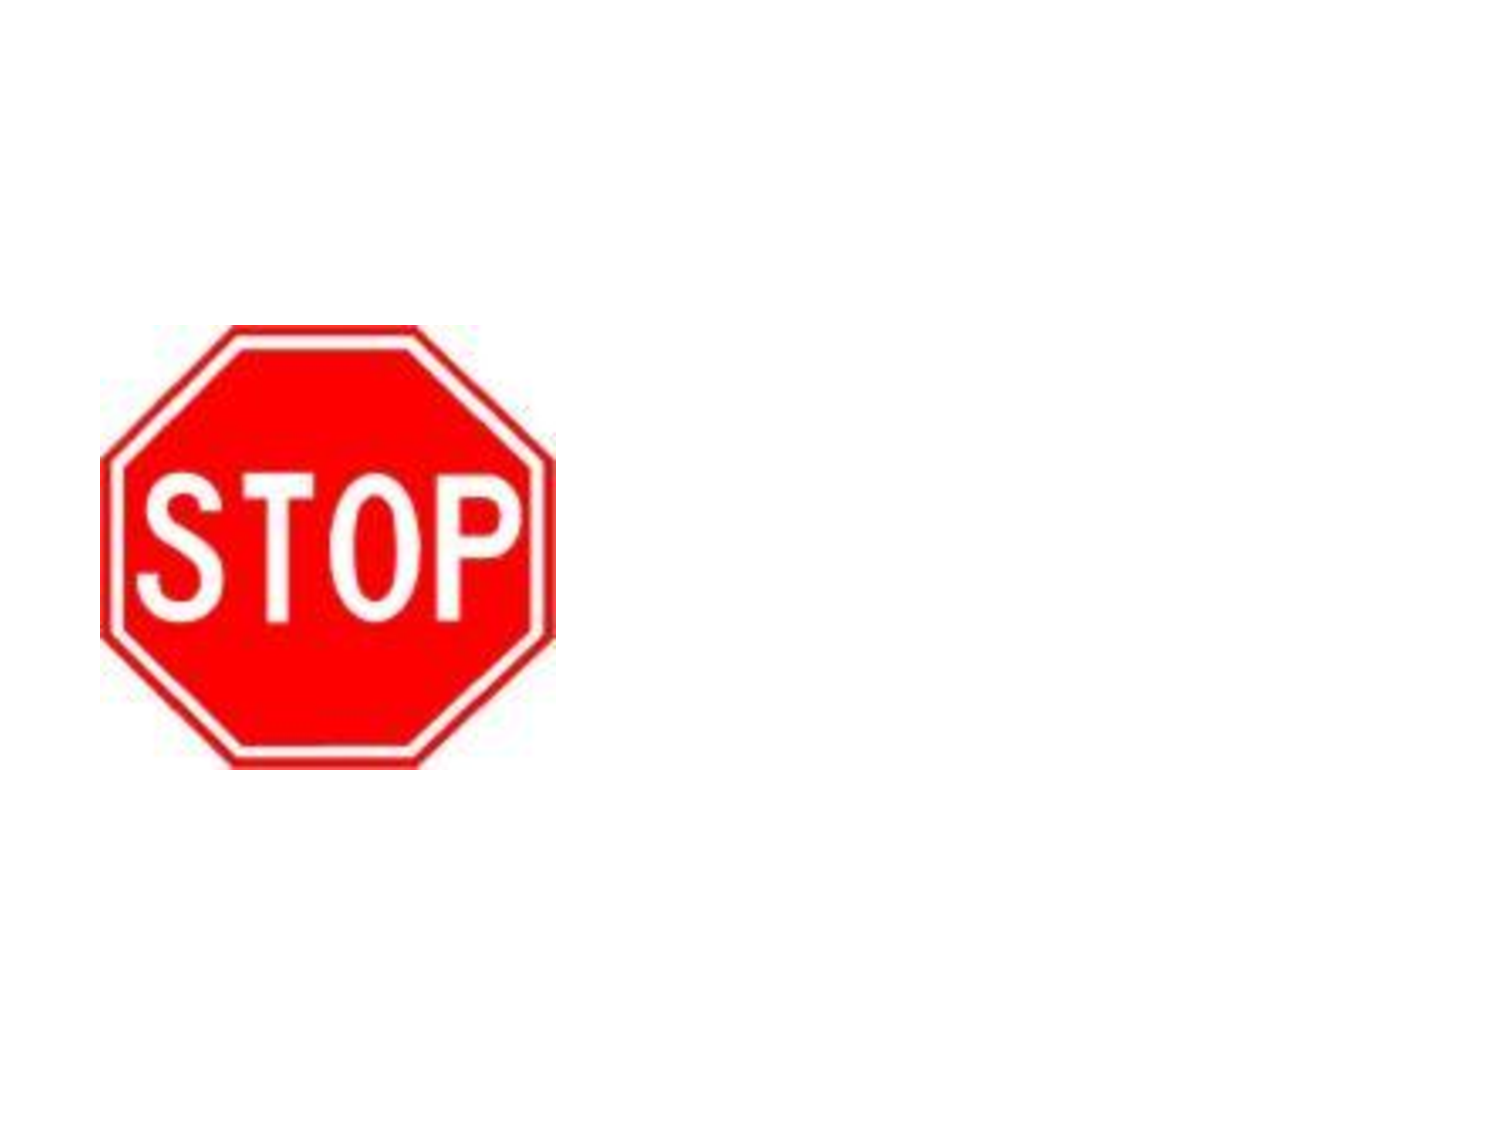 Stop Sign Template Printable